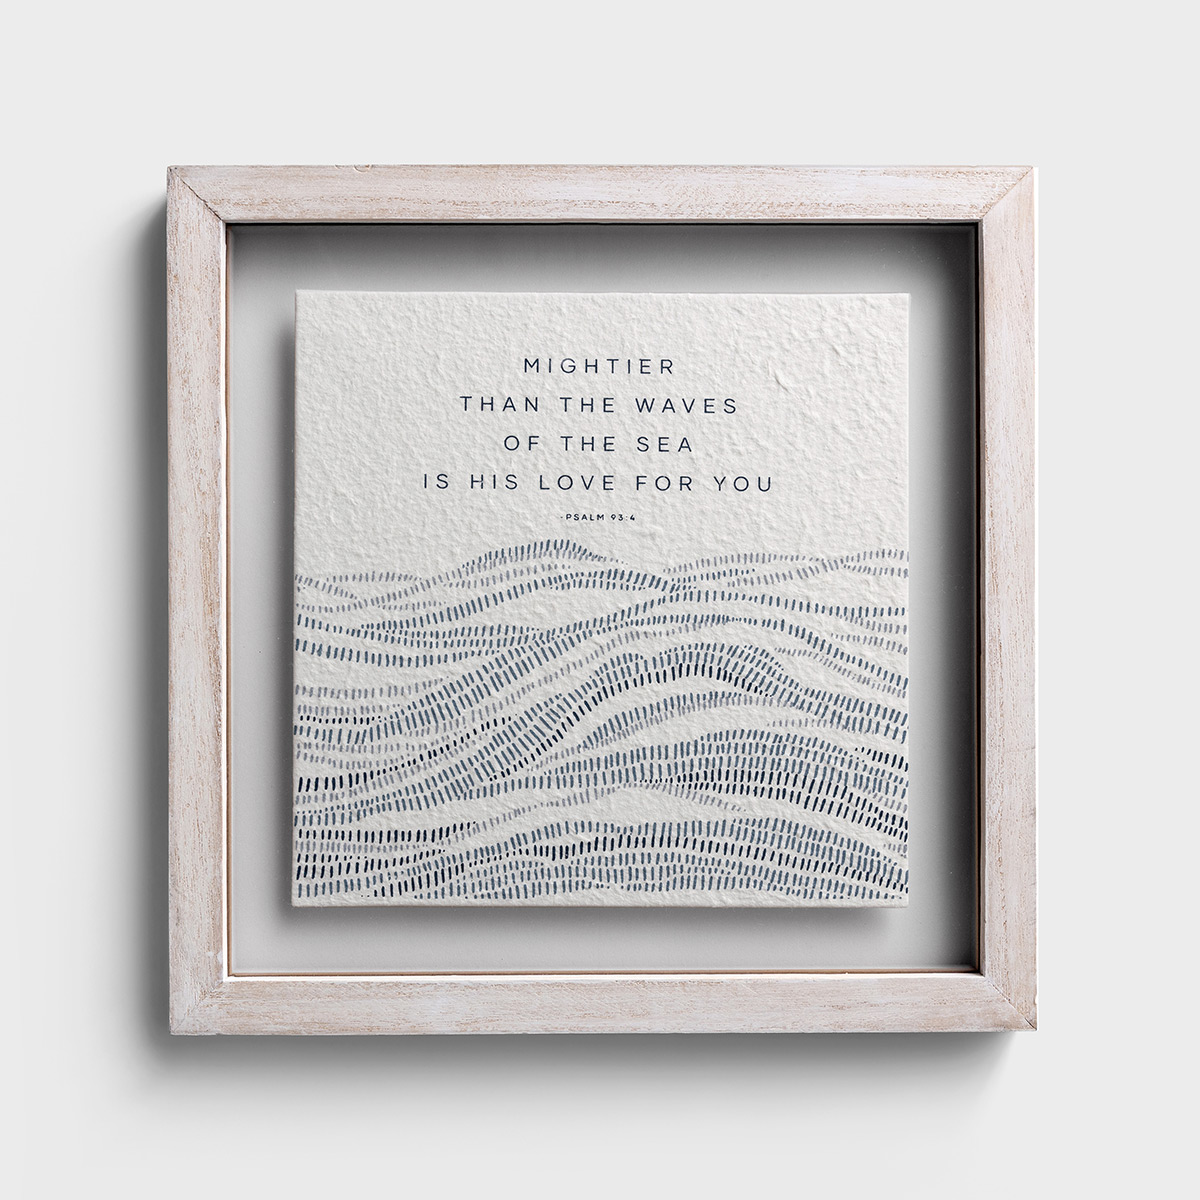 Mightier Than The Waves - Framed Wall Art